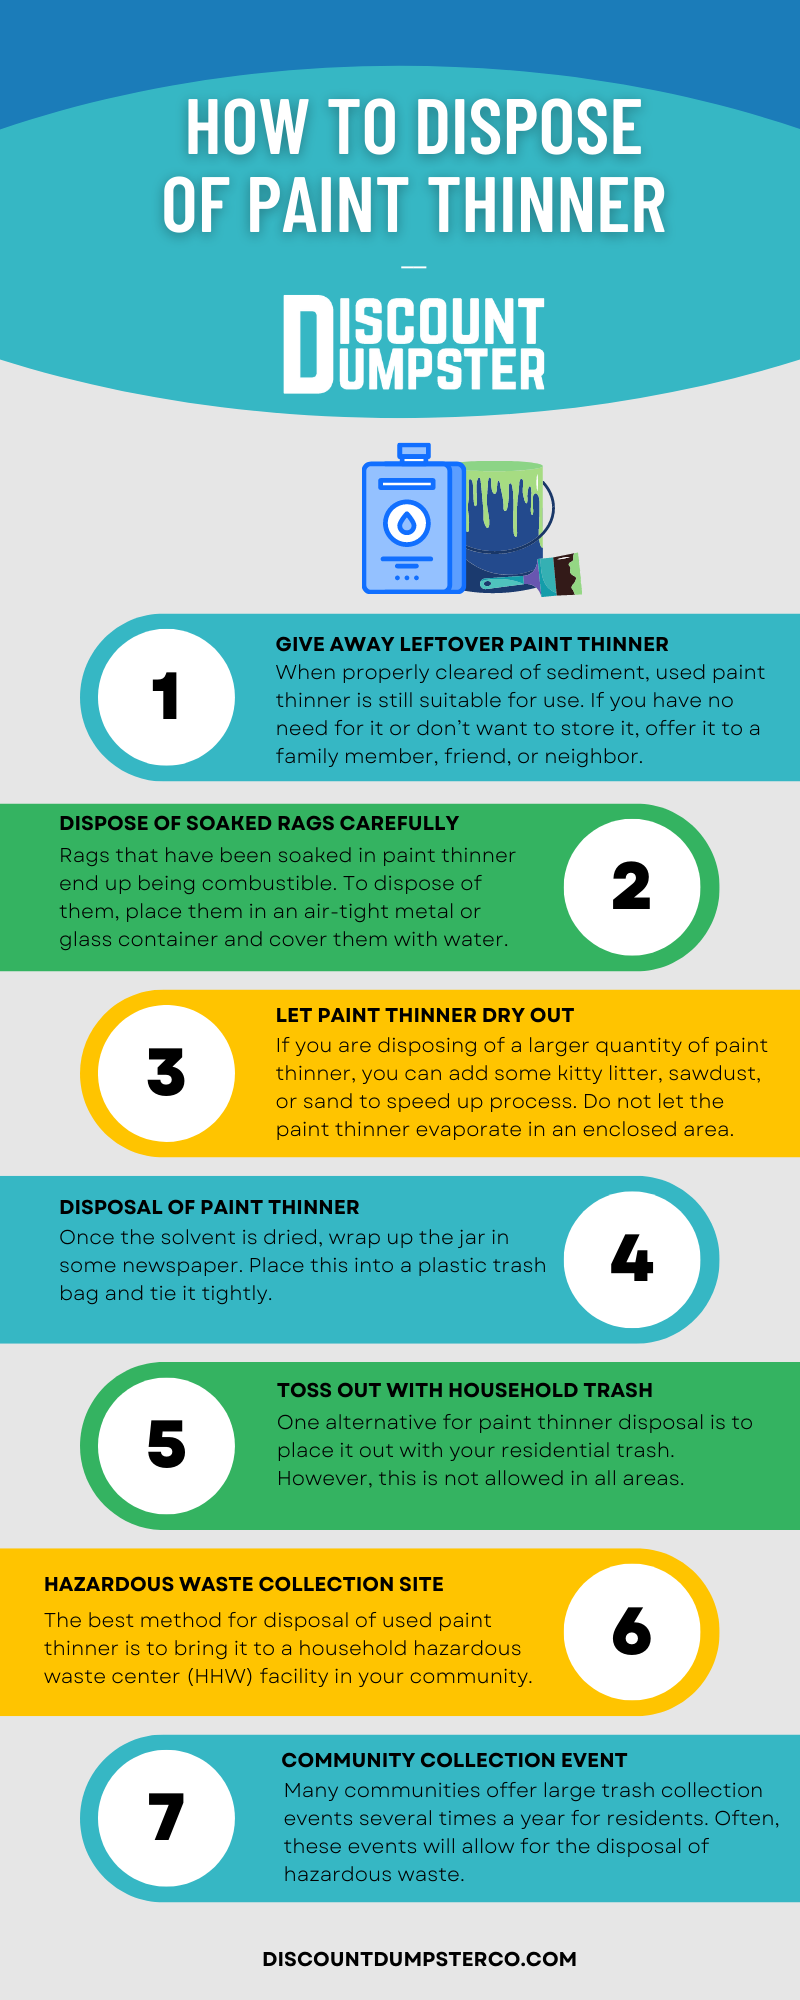 How to choose the best paint thinner